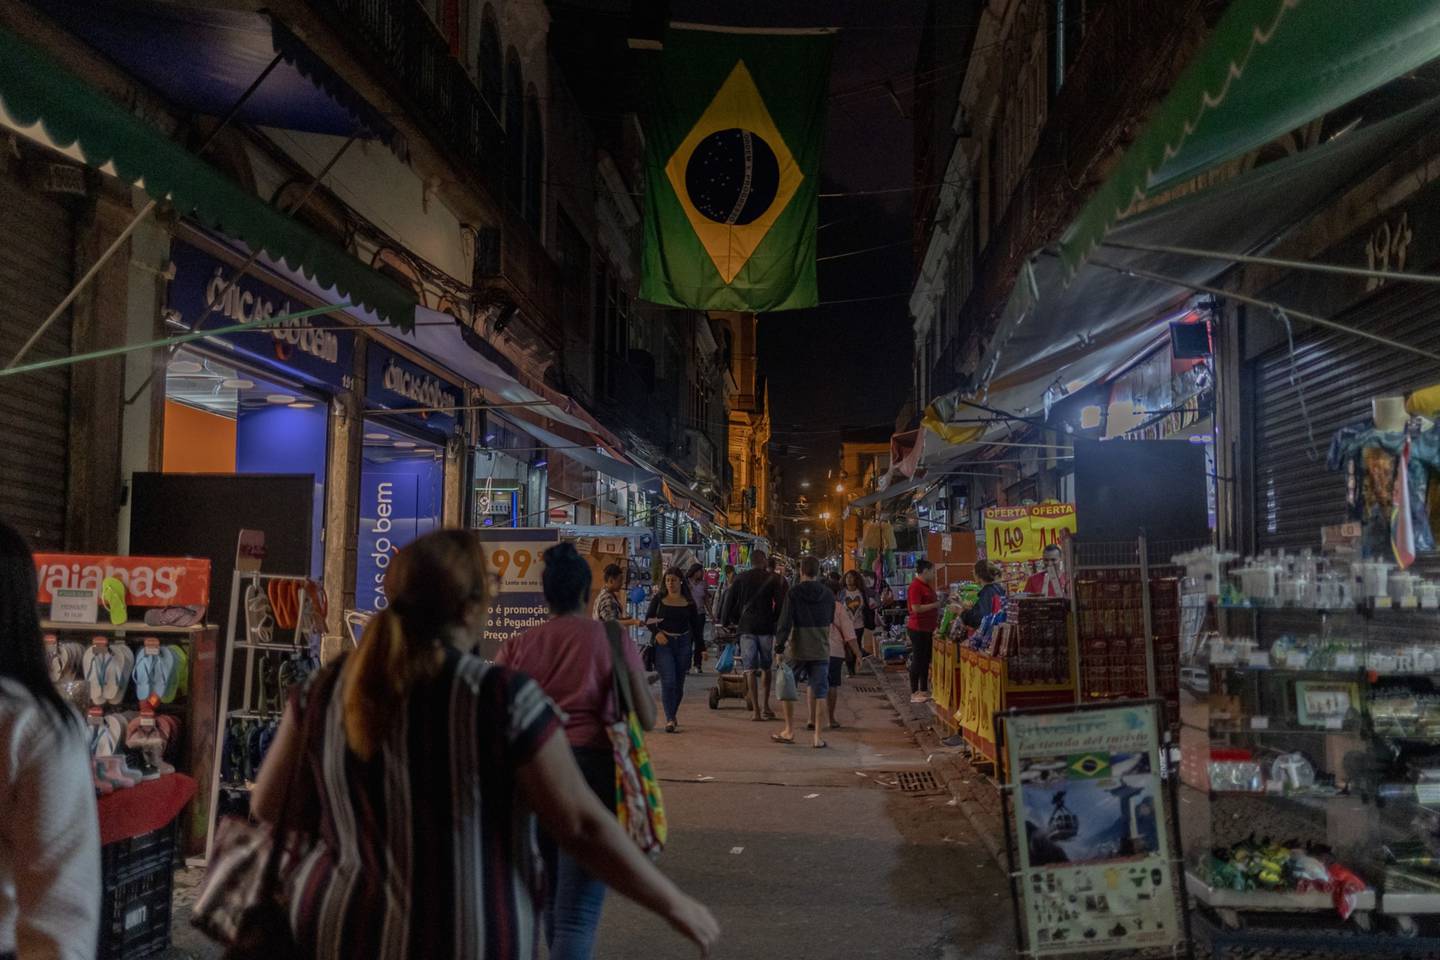 Brazil is seen by many as the only major developing nation with an economic formula that can withstand the financial pressure created by soaring global yields.